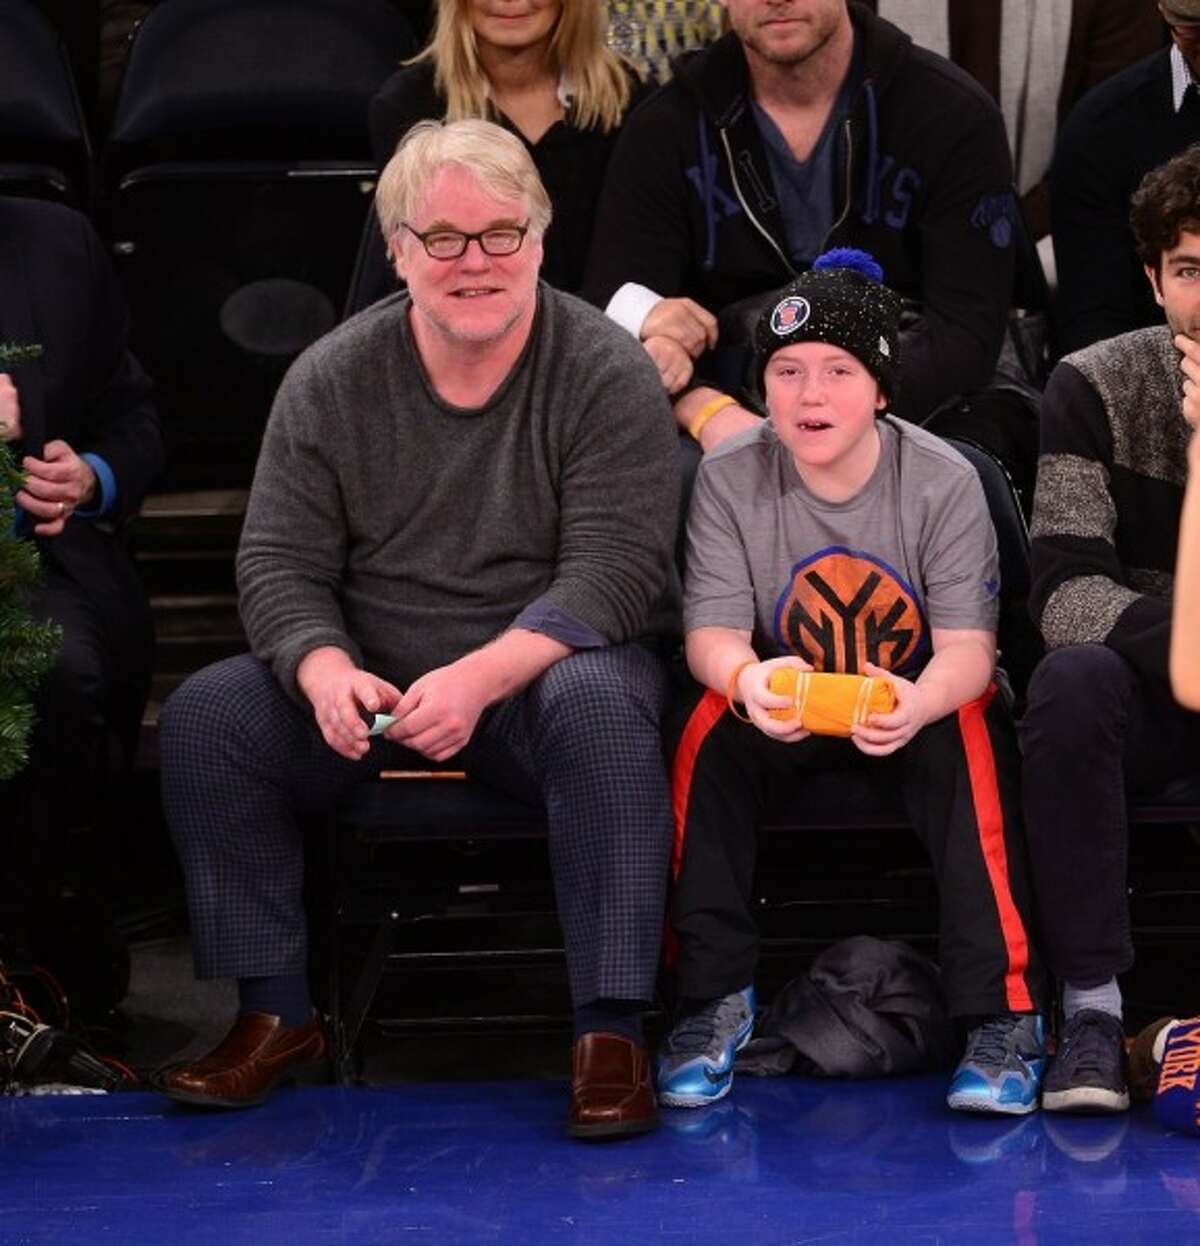 According to the New York Post, Philip Seymour Hoffman "left behind a $35 million estate, but not a penny to his three children."